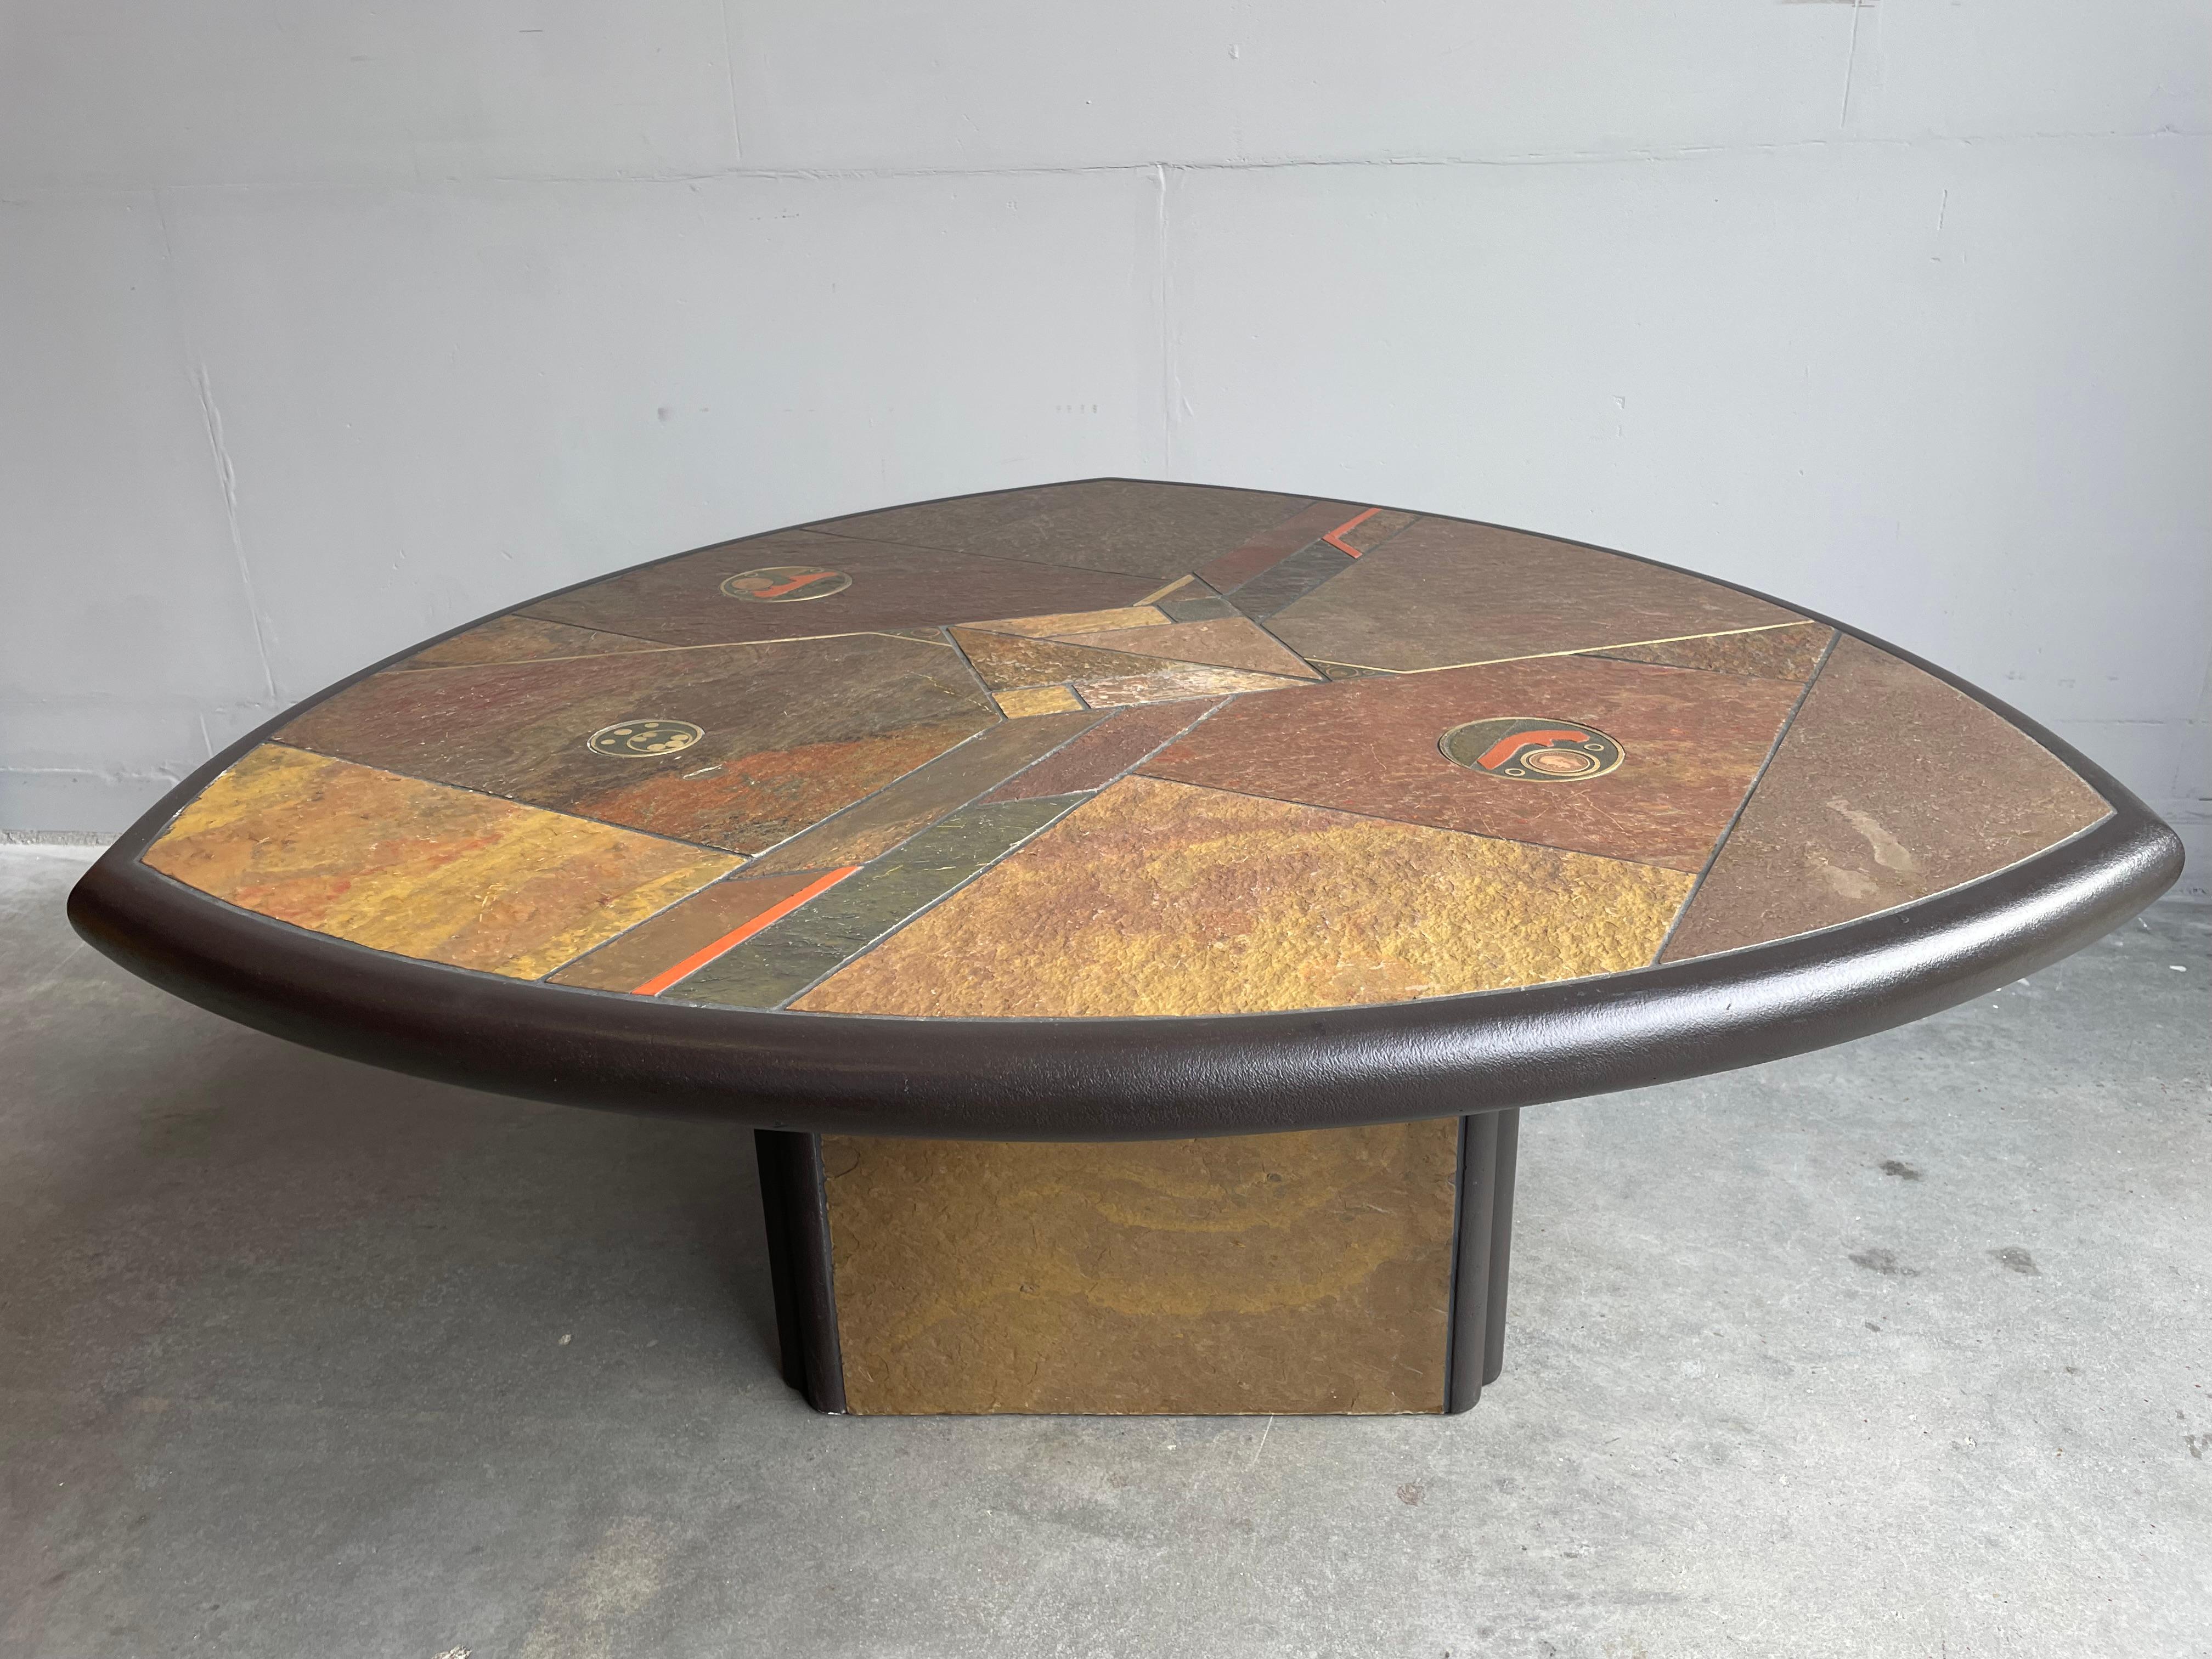 Extremely rare, triangular midcentury coffee table by Dutch designer Paul Kingma.

If you have been looking for a stylish and rare, midcentury modern coffee table then you may have before come across brutalist coffee tables by Paul Kingma. With